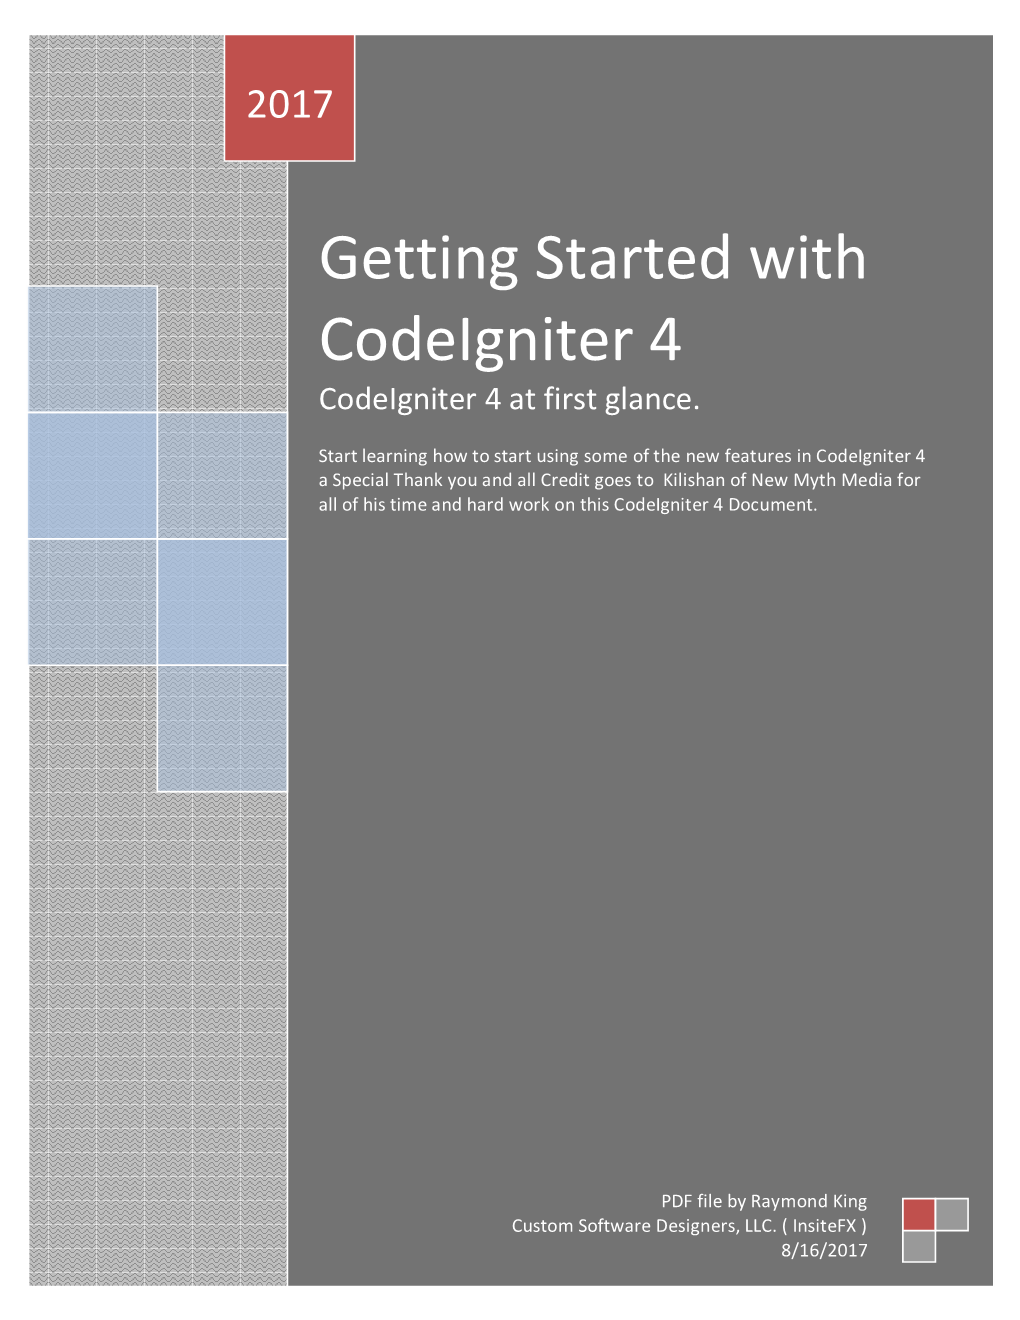 Getting Started with Codeigniter 4 Codeigniter 4 at First Glance